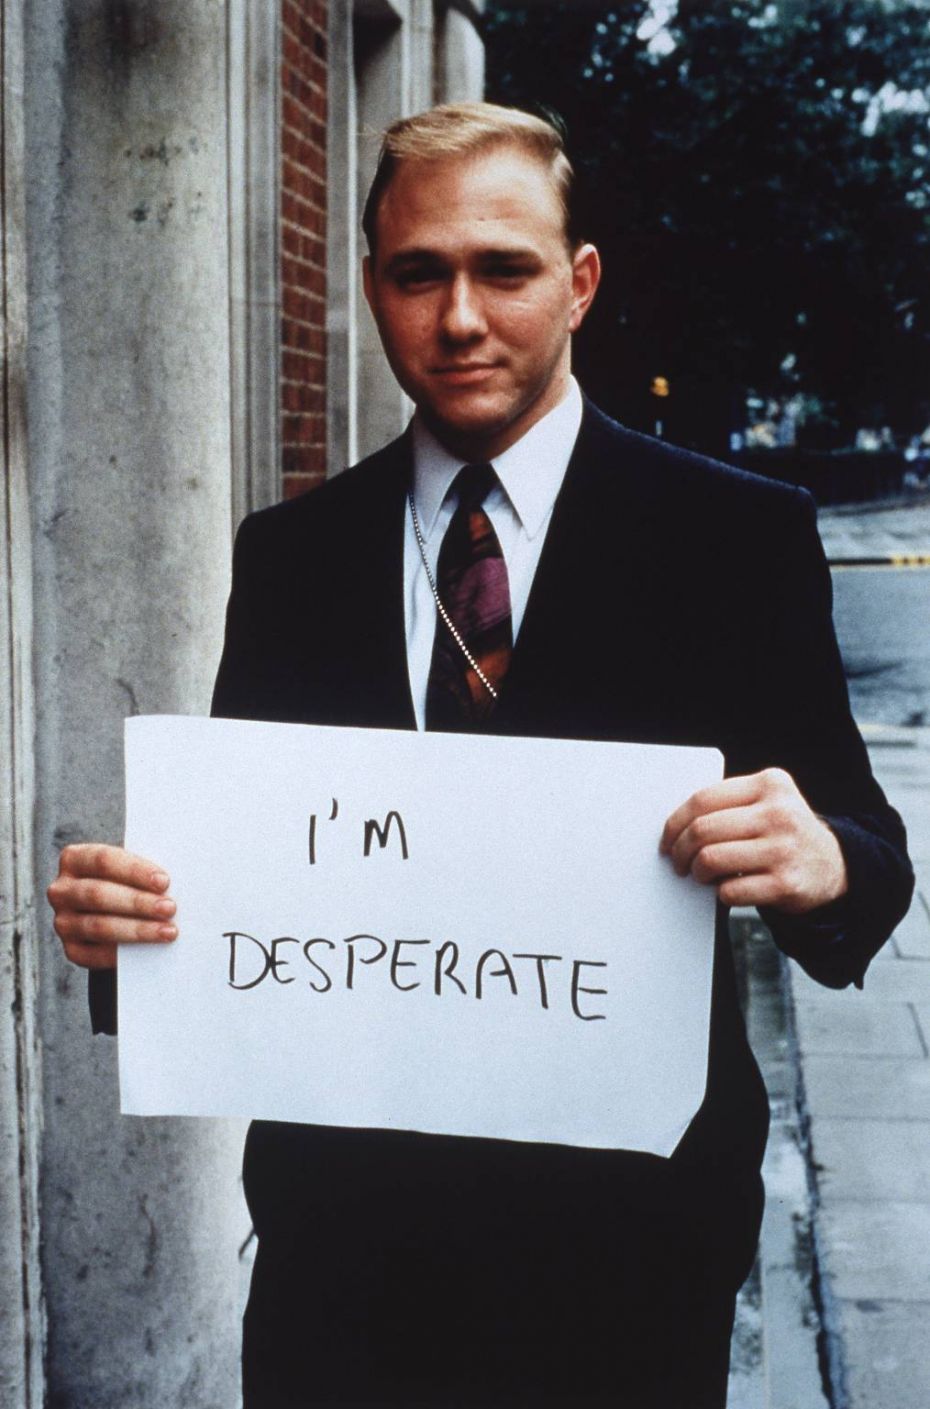 Gillian Wearing’s photograph 'I’m desperate' from a larger series of more than 50 works (1992-3, Framed color photographs on photographic paper mounted on board, Each 48 x 36 ¼ in.)